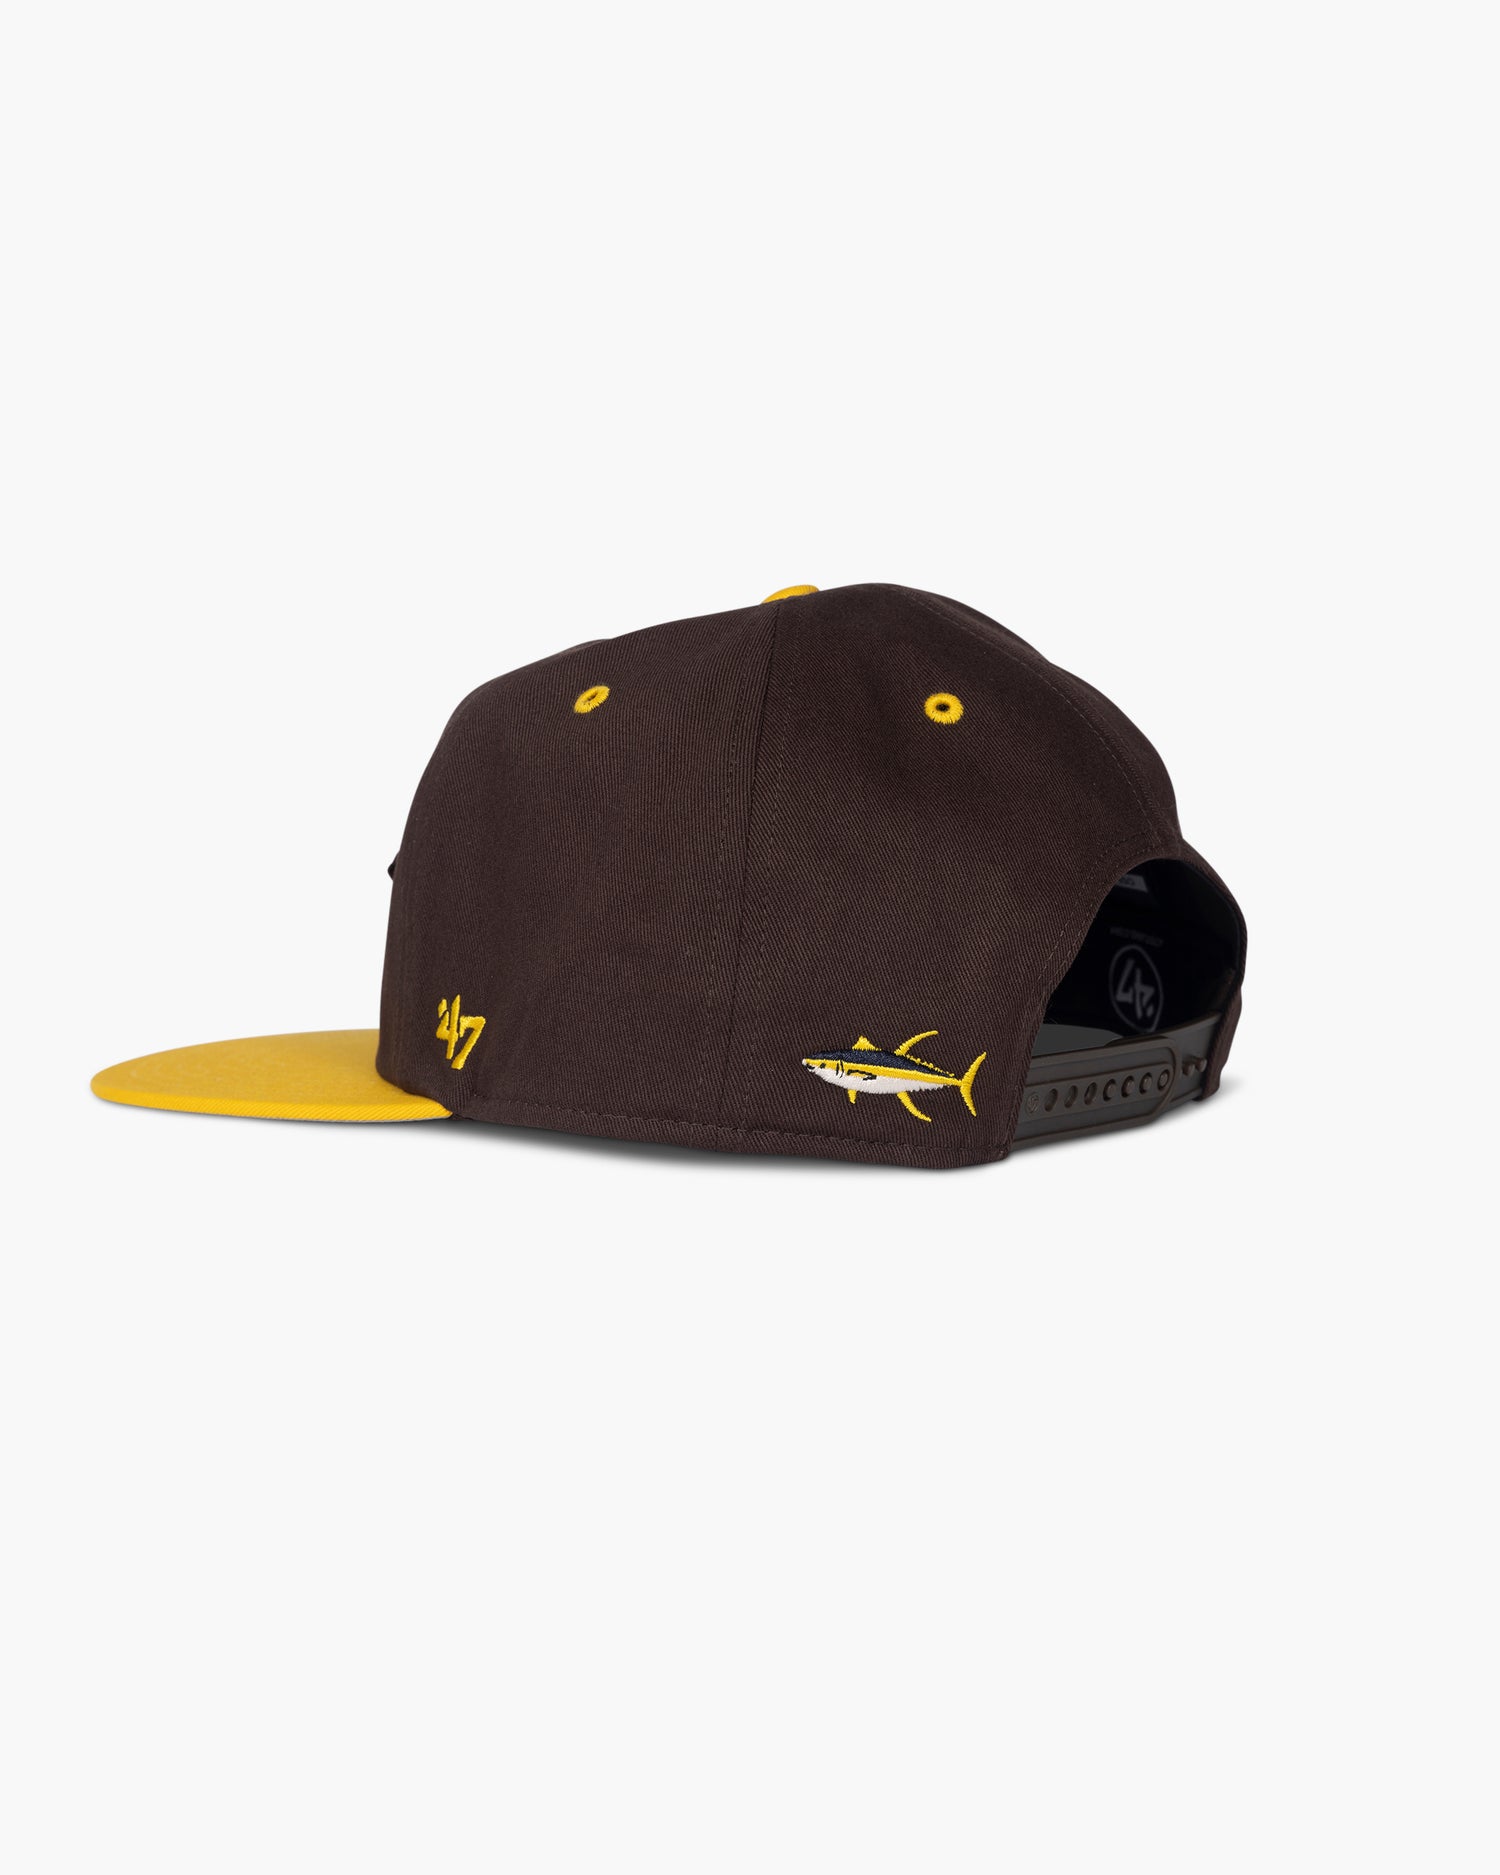 back angled view of Salty Crew x Padres x 47 Brown Unstructured Snapback